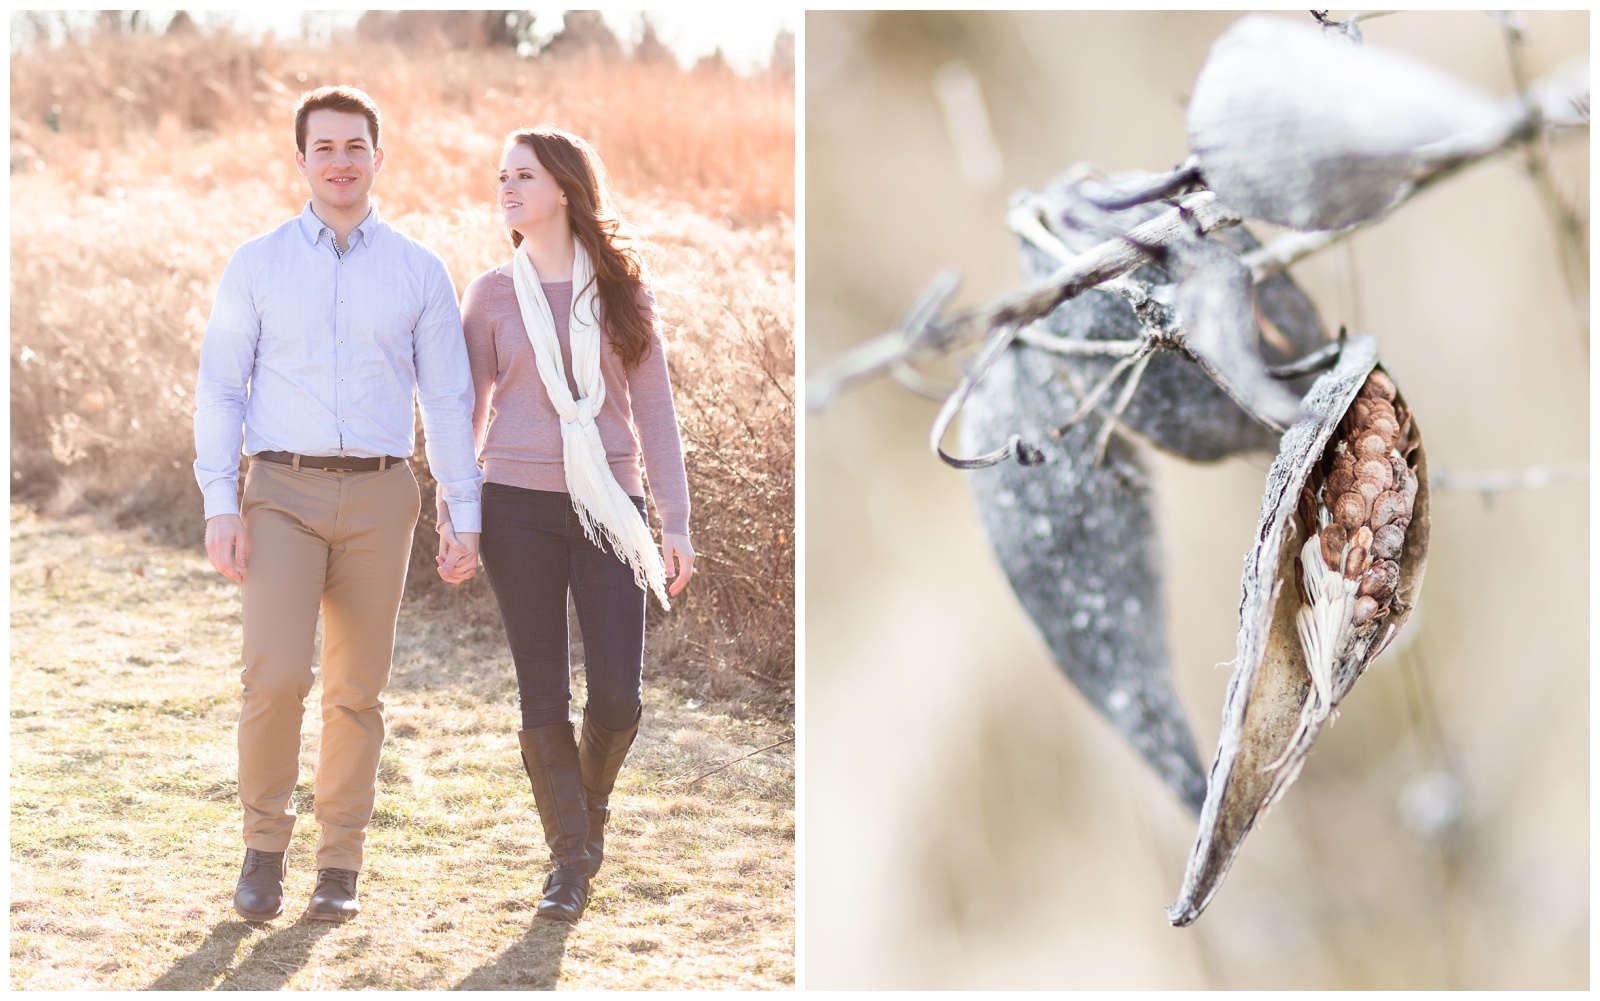 Couple walking in front of field of tall grass|natural light| detail nature shot